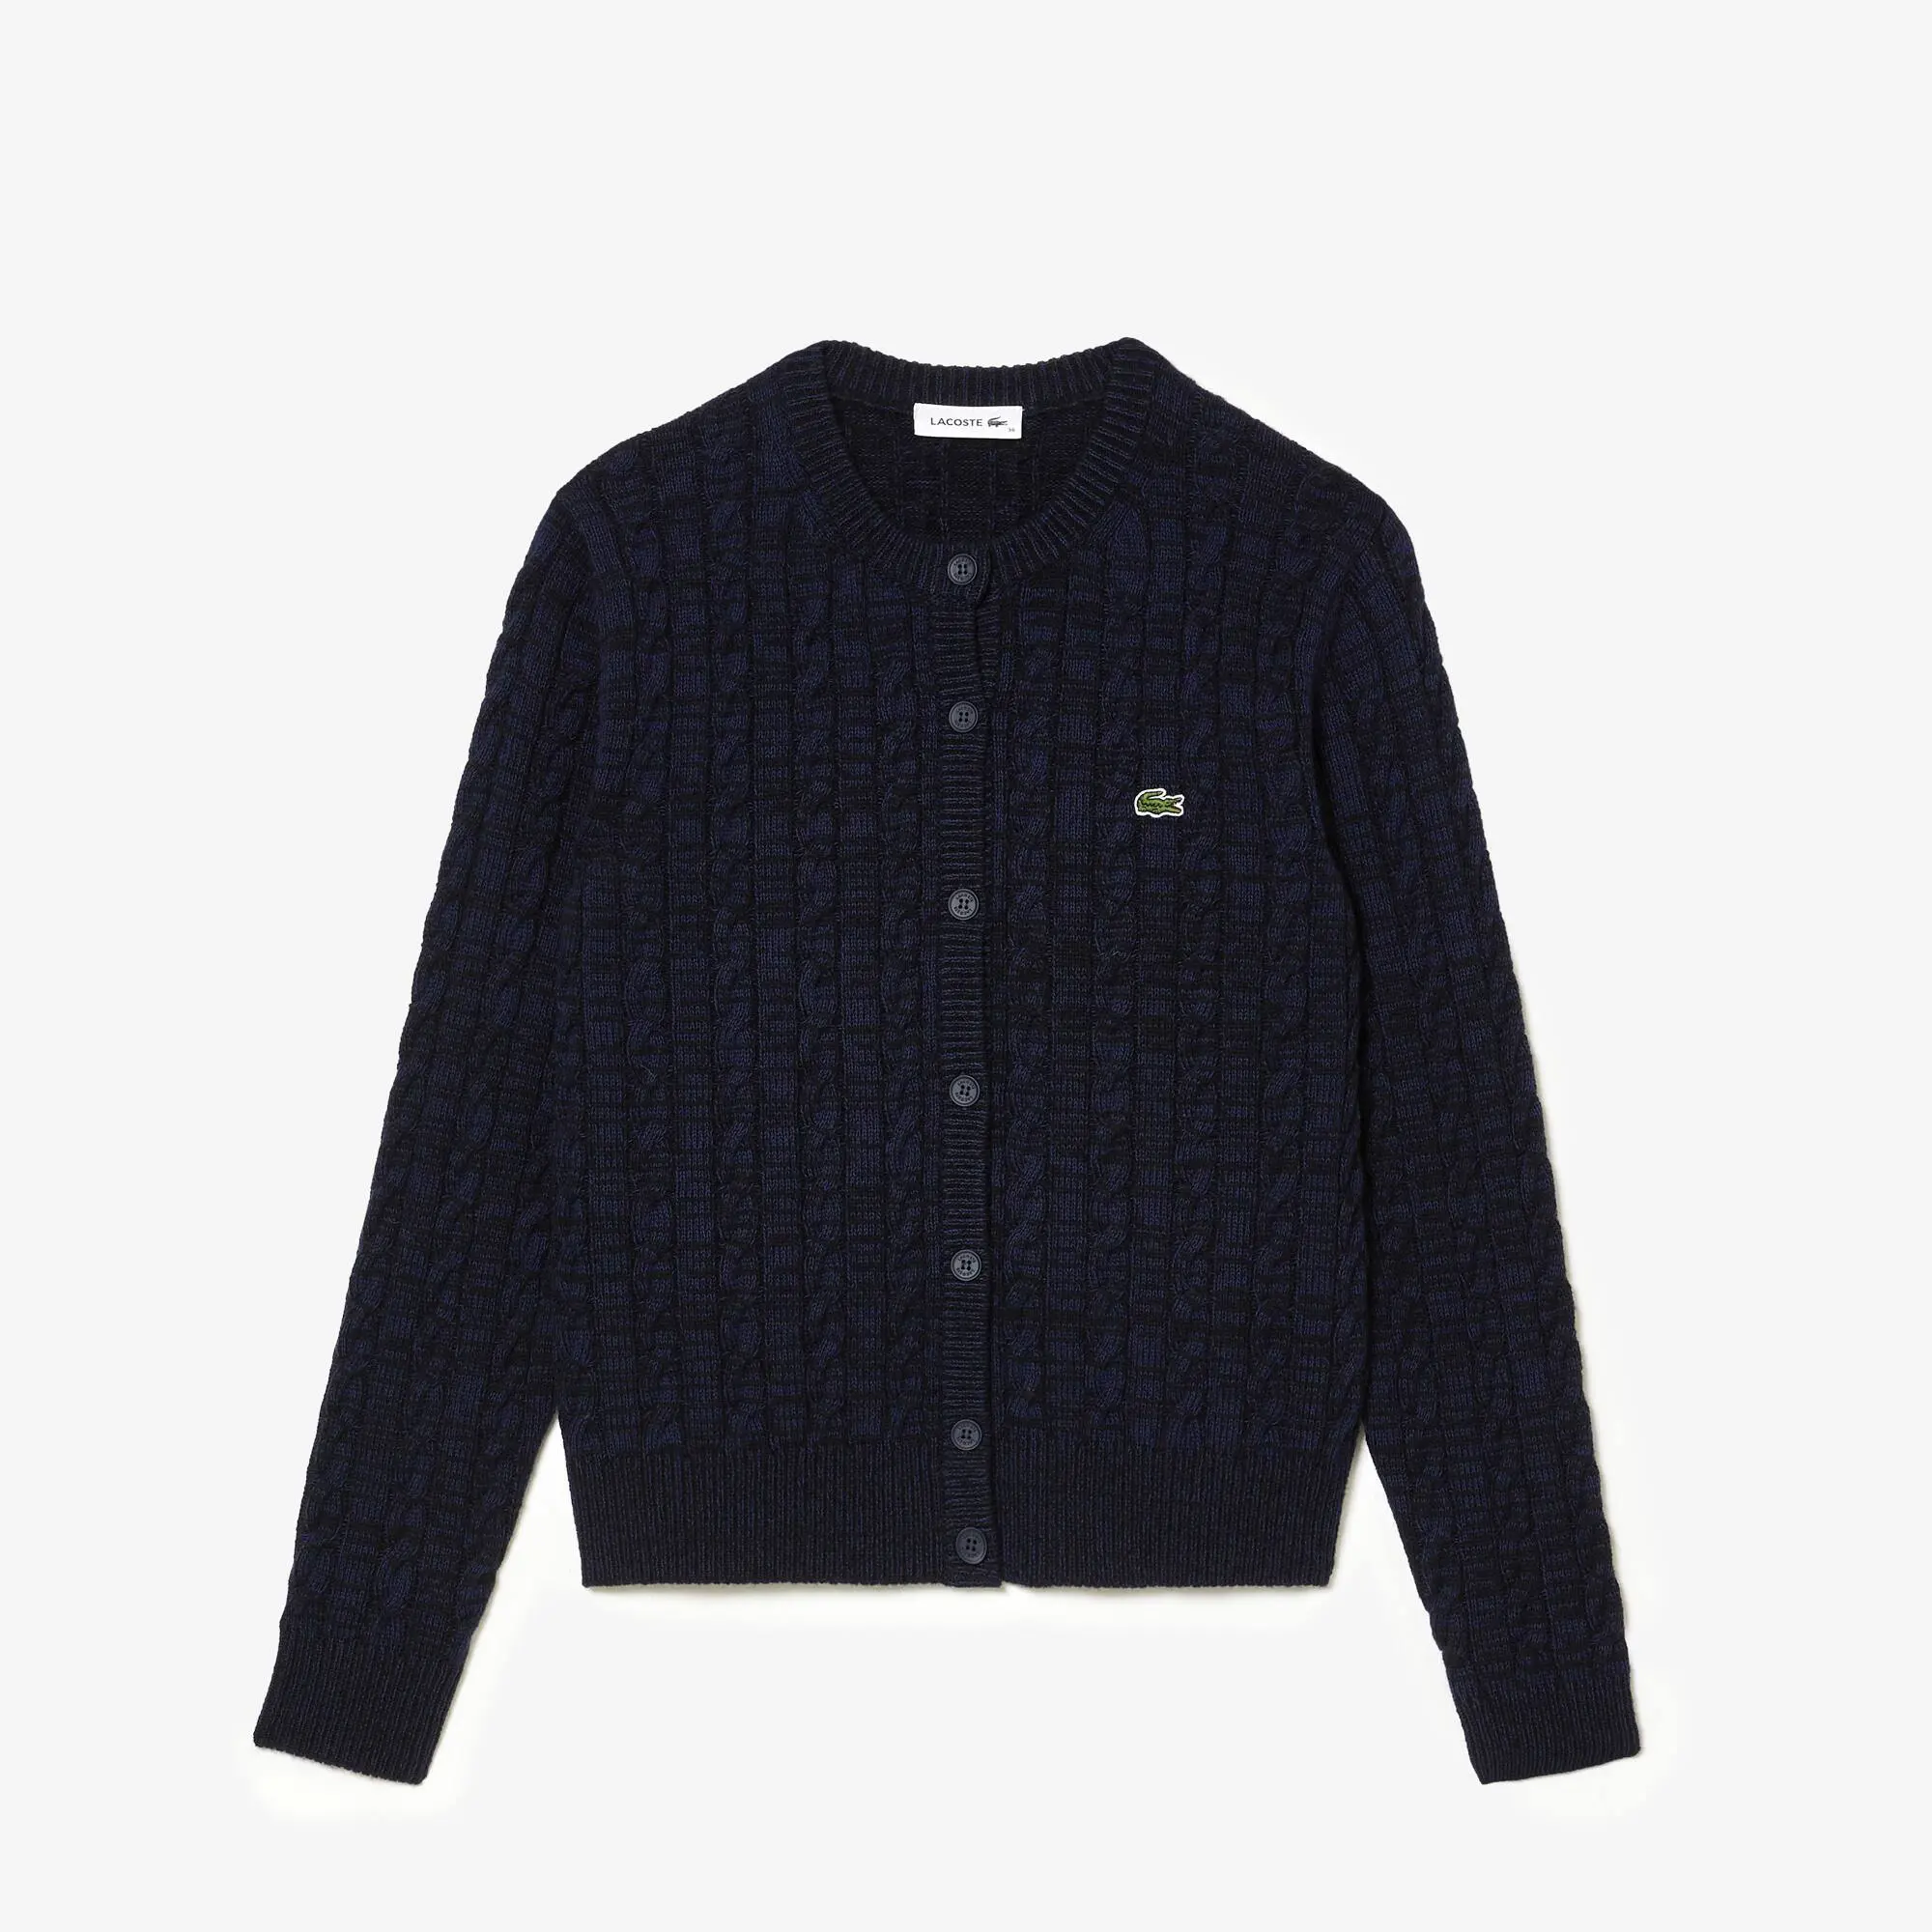 Lacoste Women's Wool Blend Cable Knit Cardigan. 2